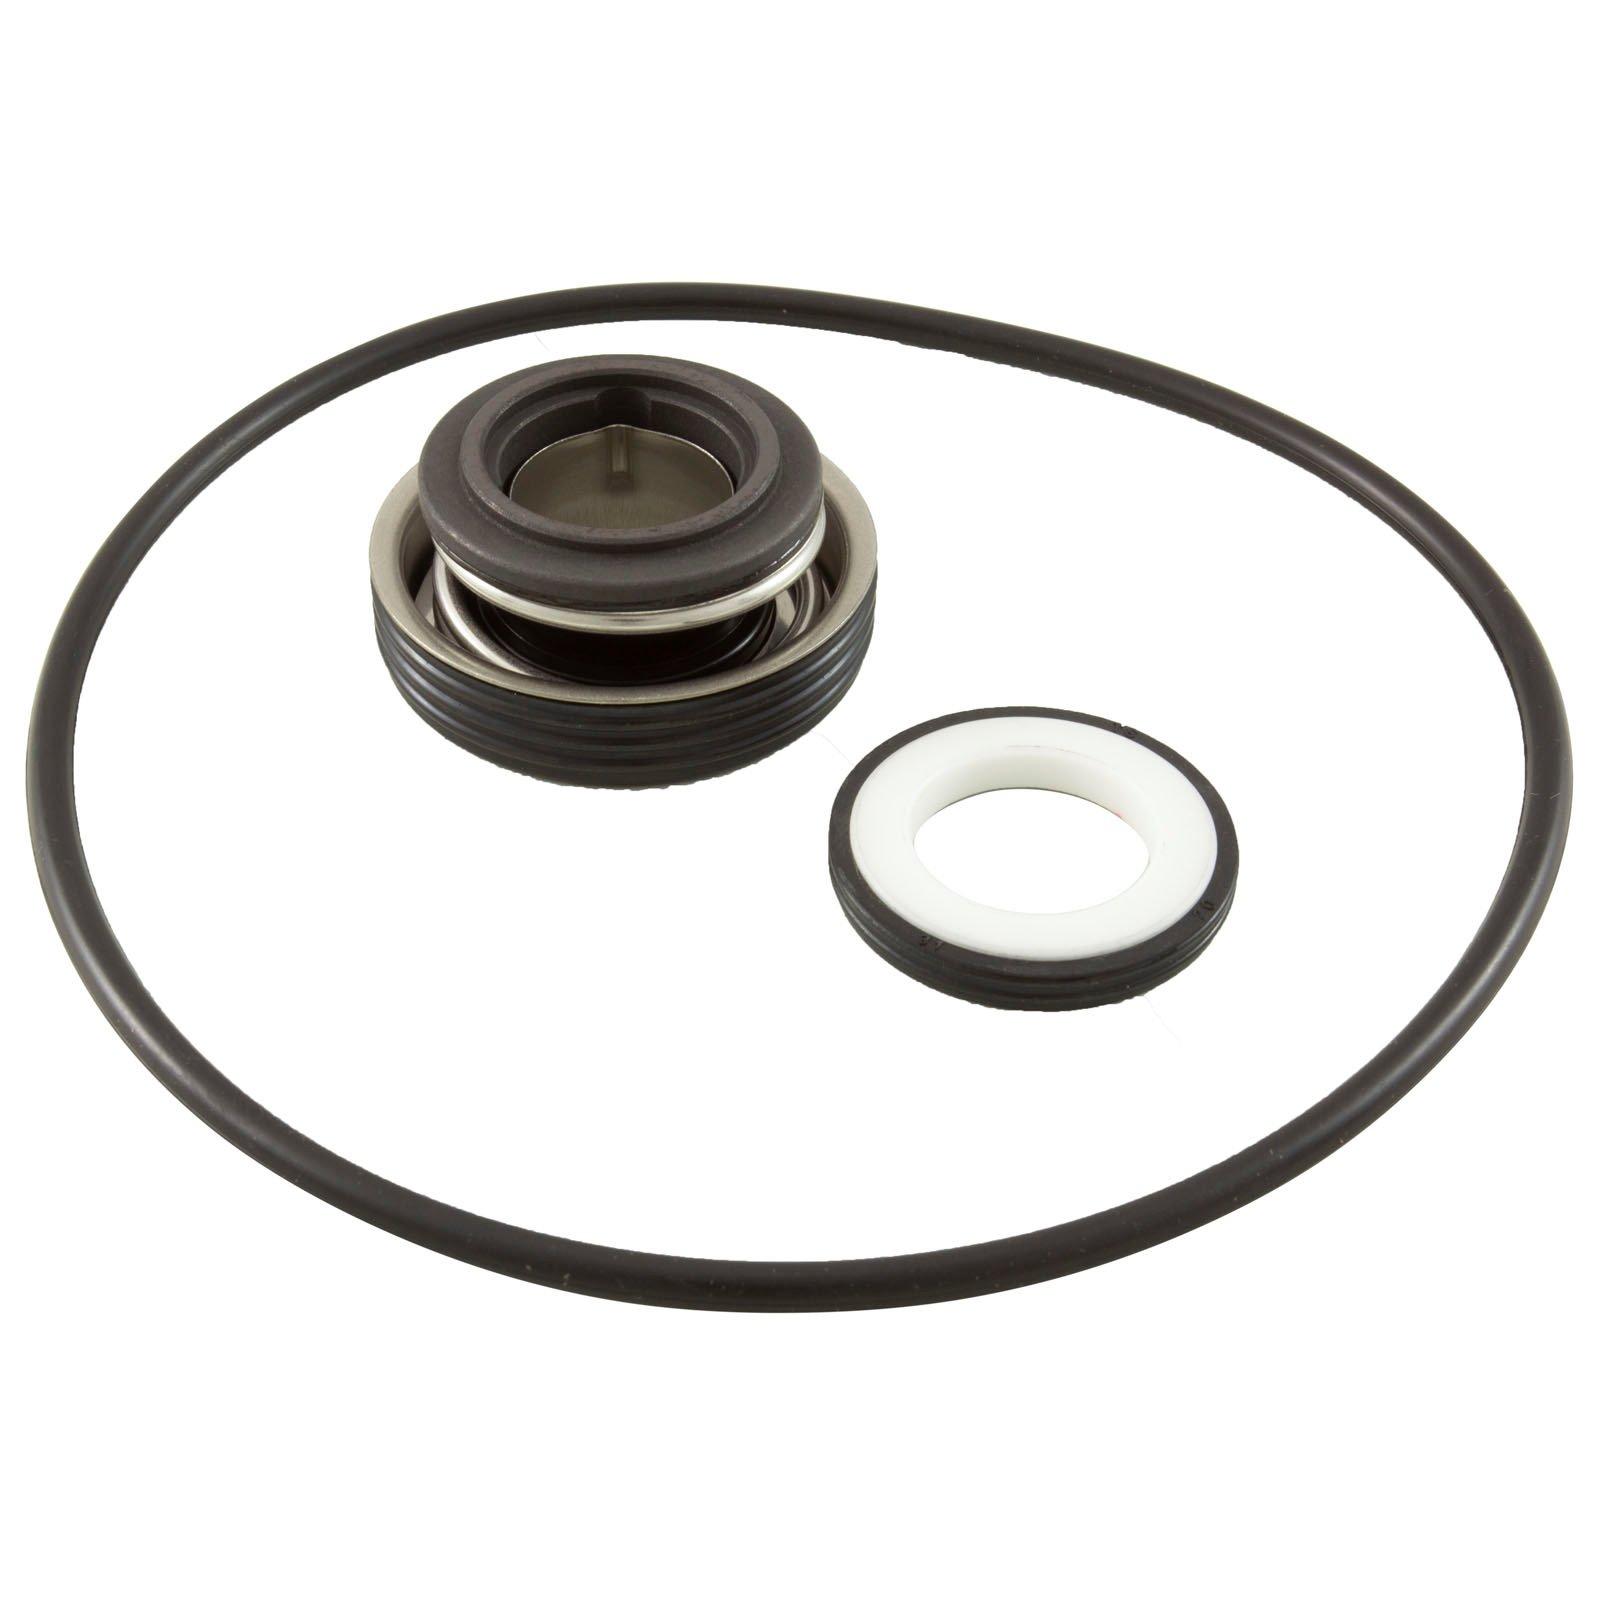 Raypak - Protege Pump Mechanical Seal with Volute O-Ring Kit for RPAGP